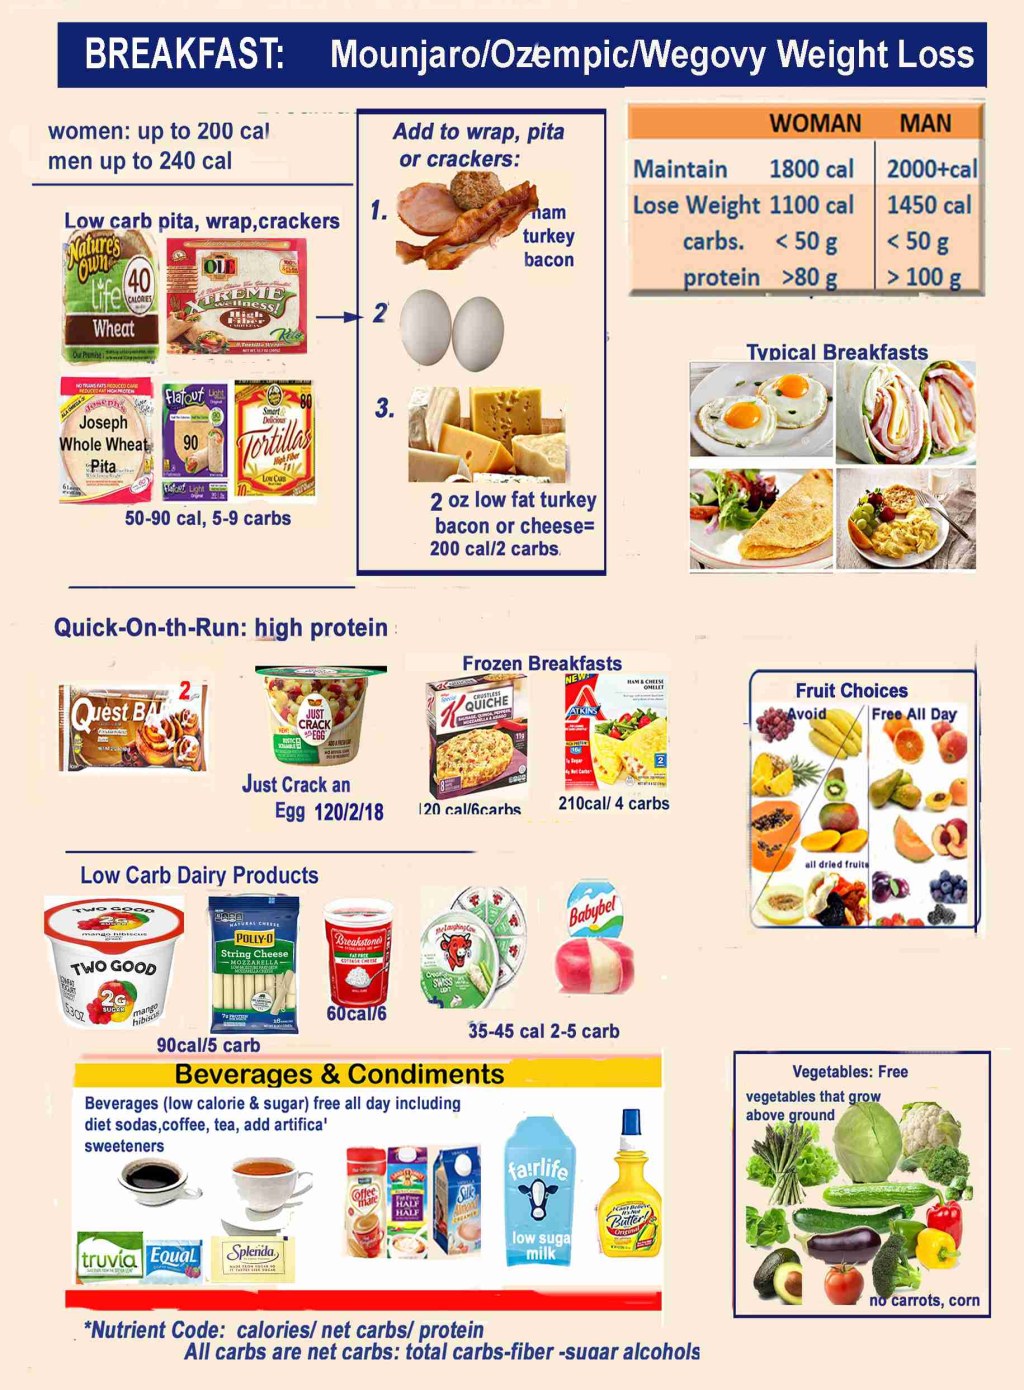 Picture of: Best Food Choices for Ozempic, Wegovy & Mounjaro Weight Loss: Dr